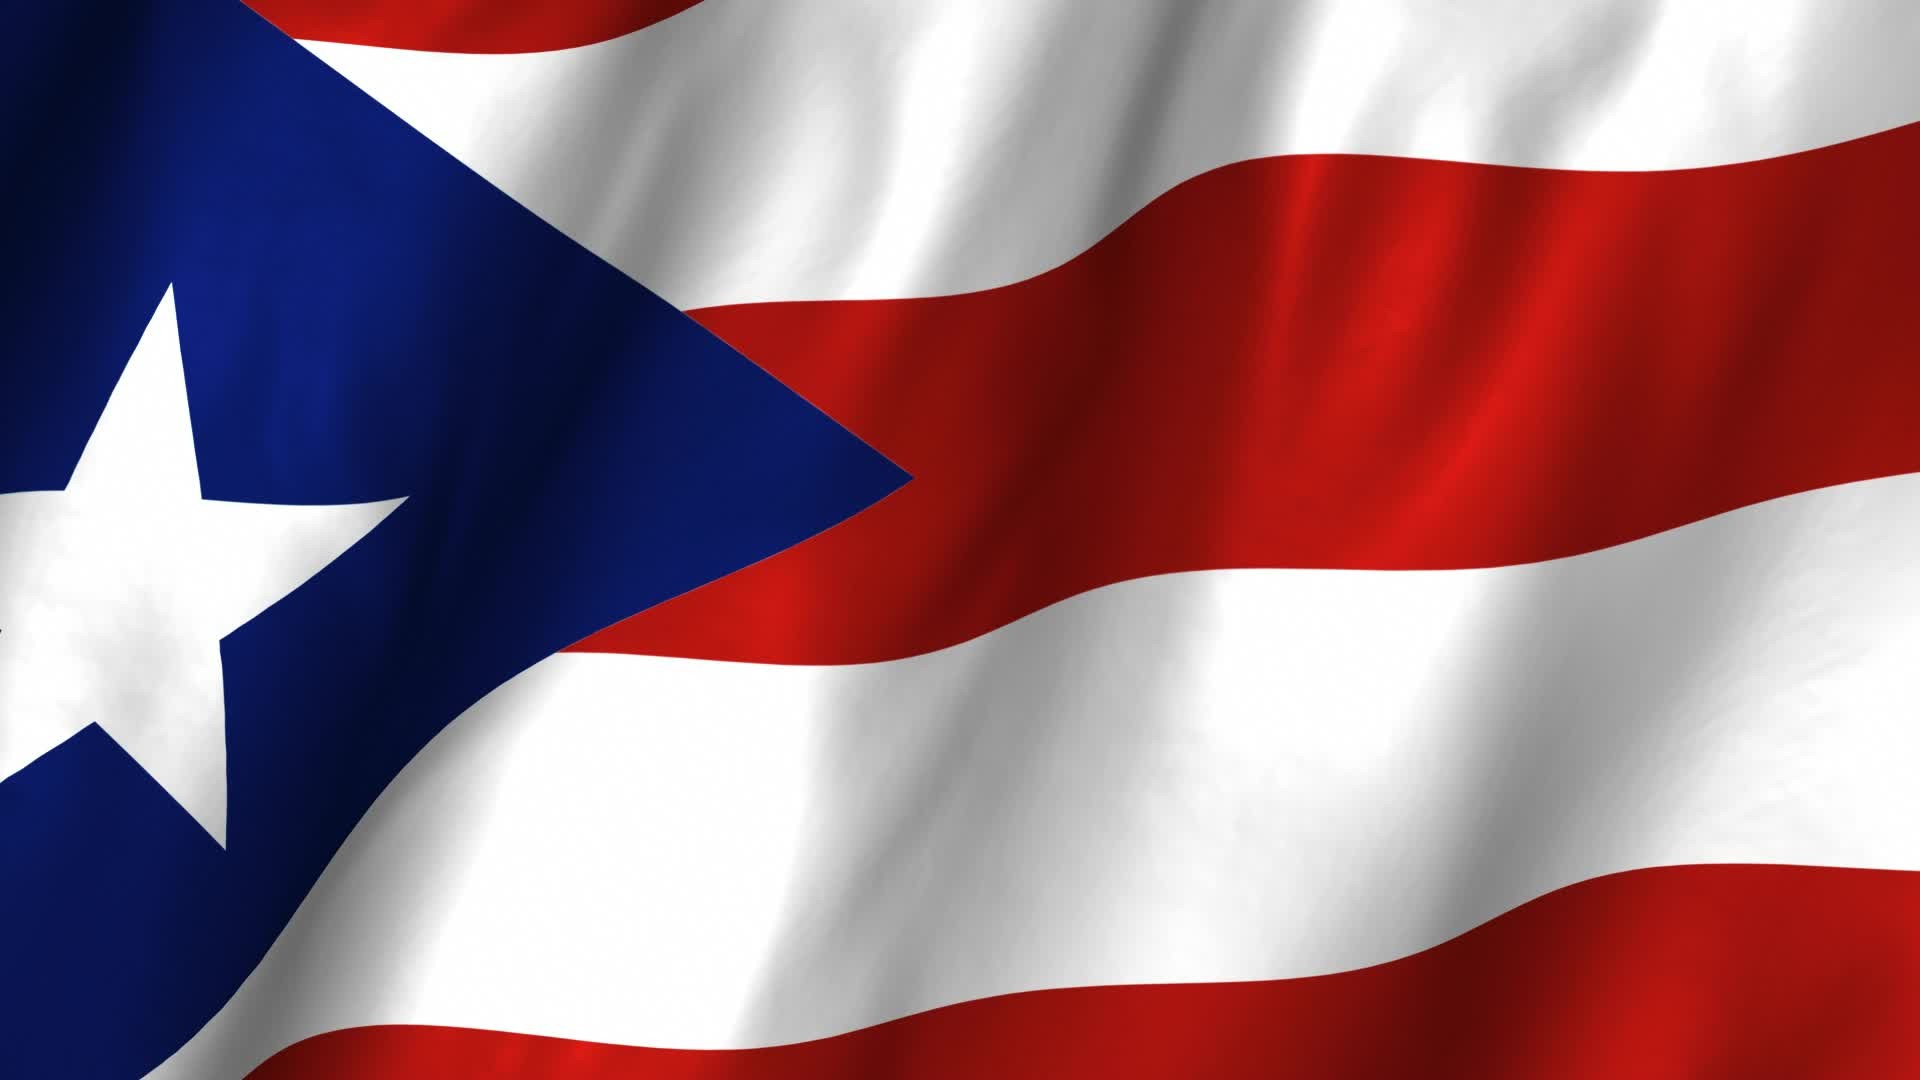 Puerto Rican Flag Background (43+ images)